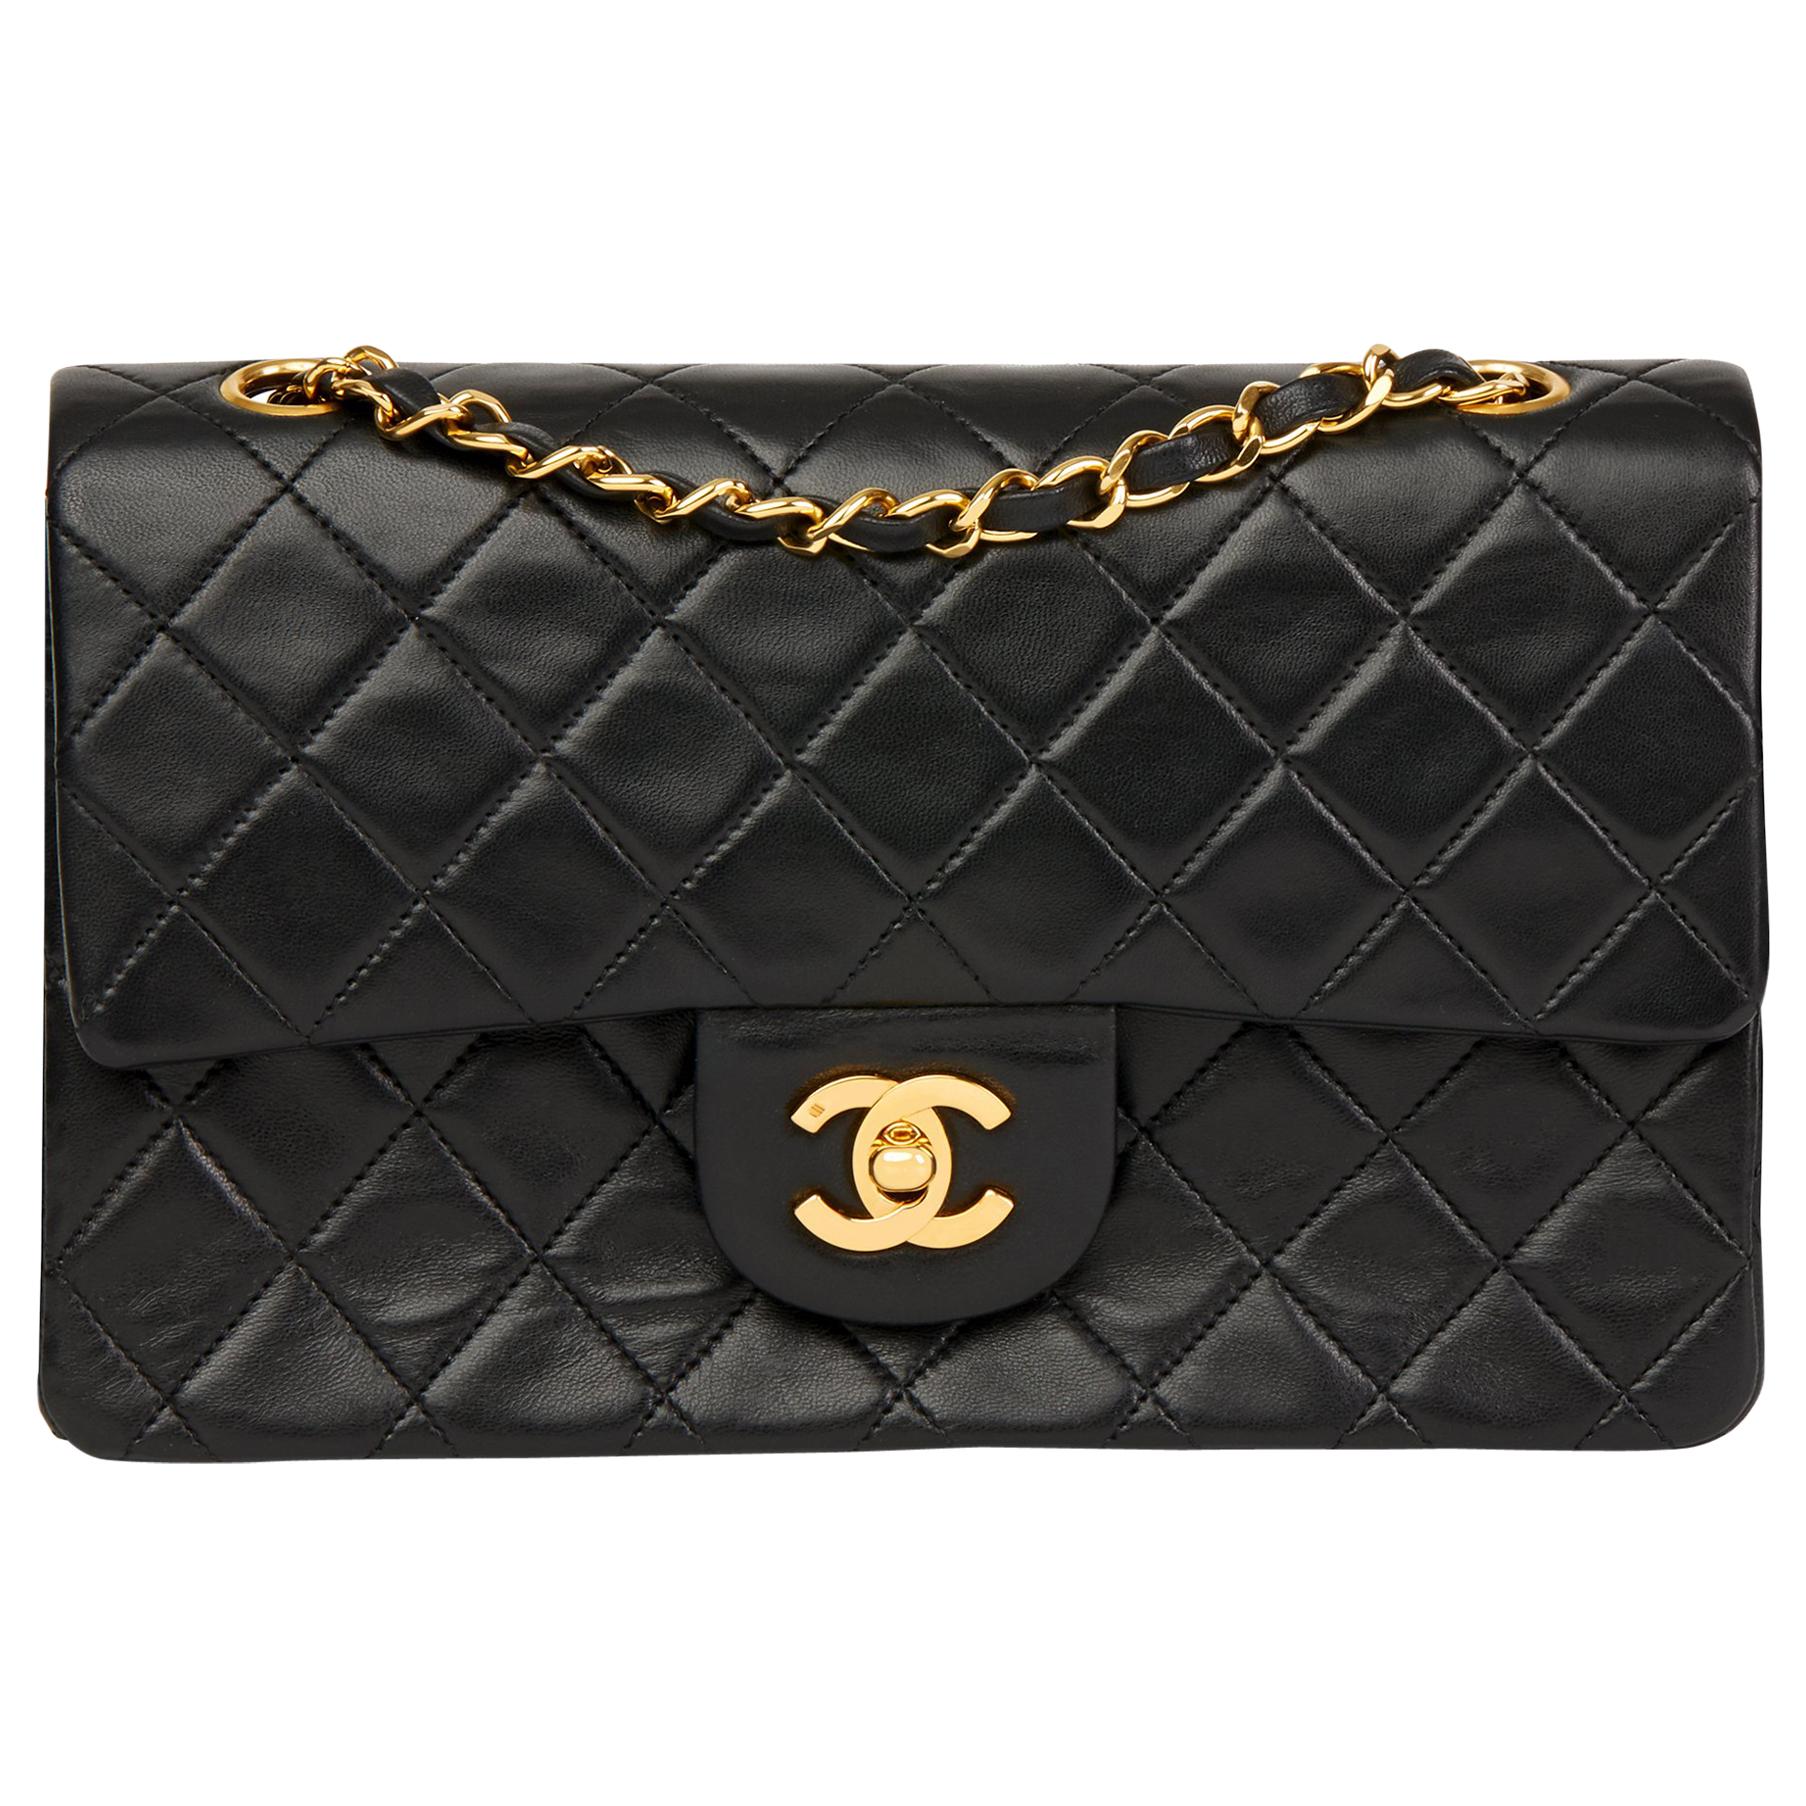 1990 Chanel Black Quilted Lambskin Vintage Small Classic Double Flap Bag